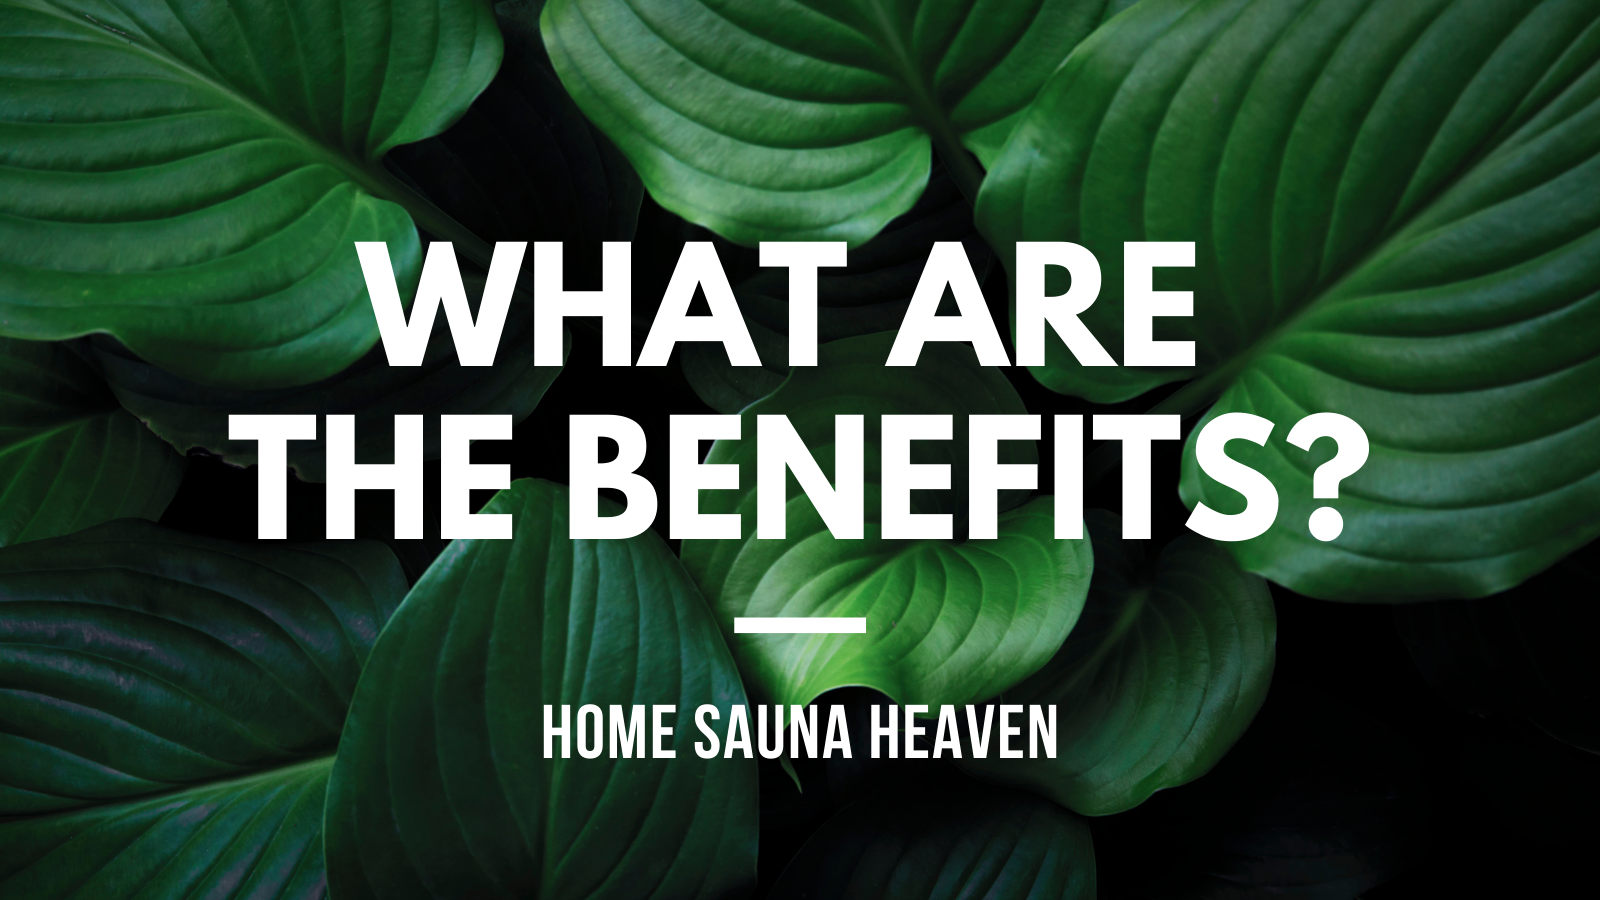 WHAT ARE THE BENEFITS?